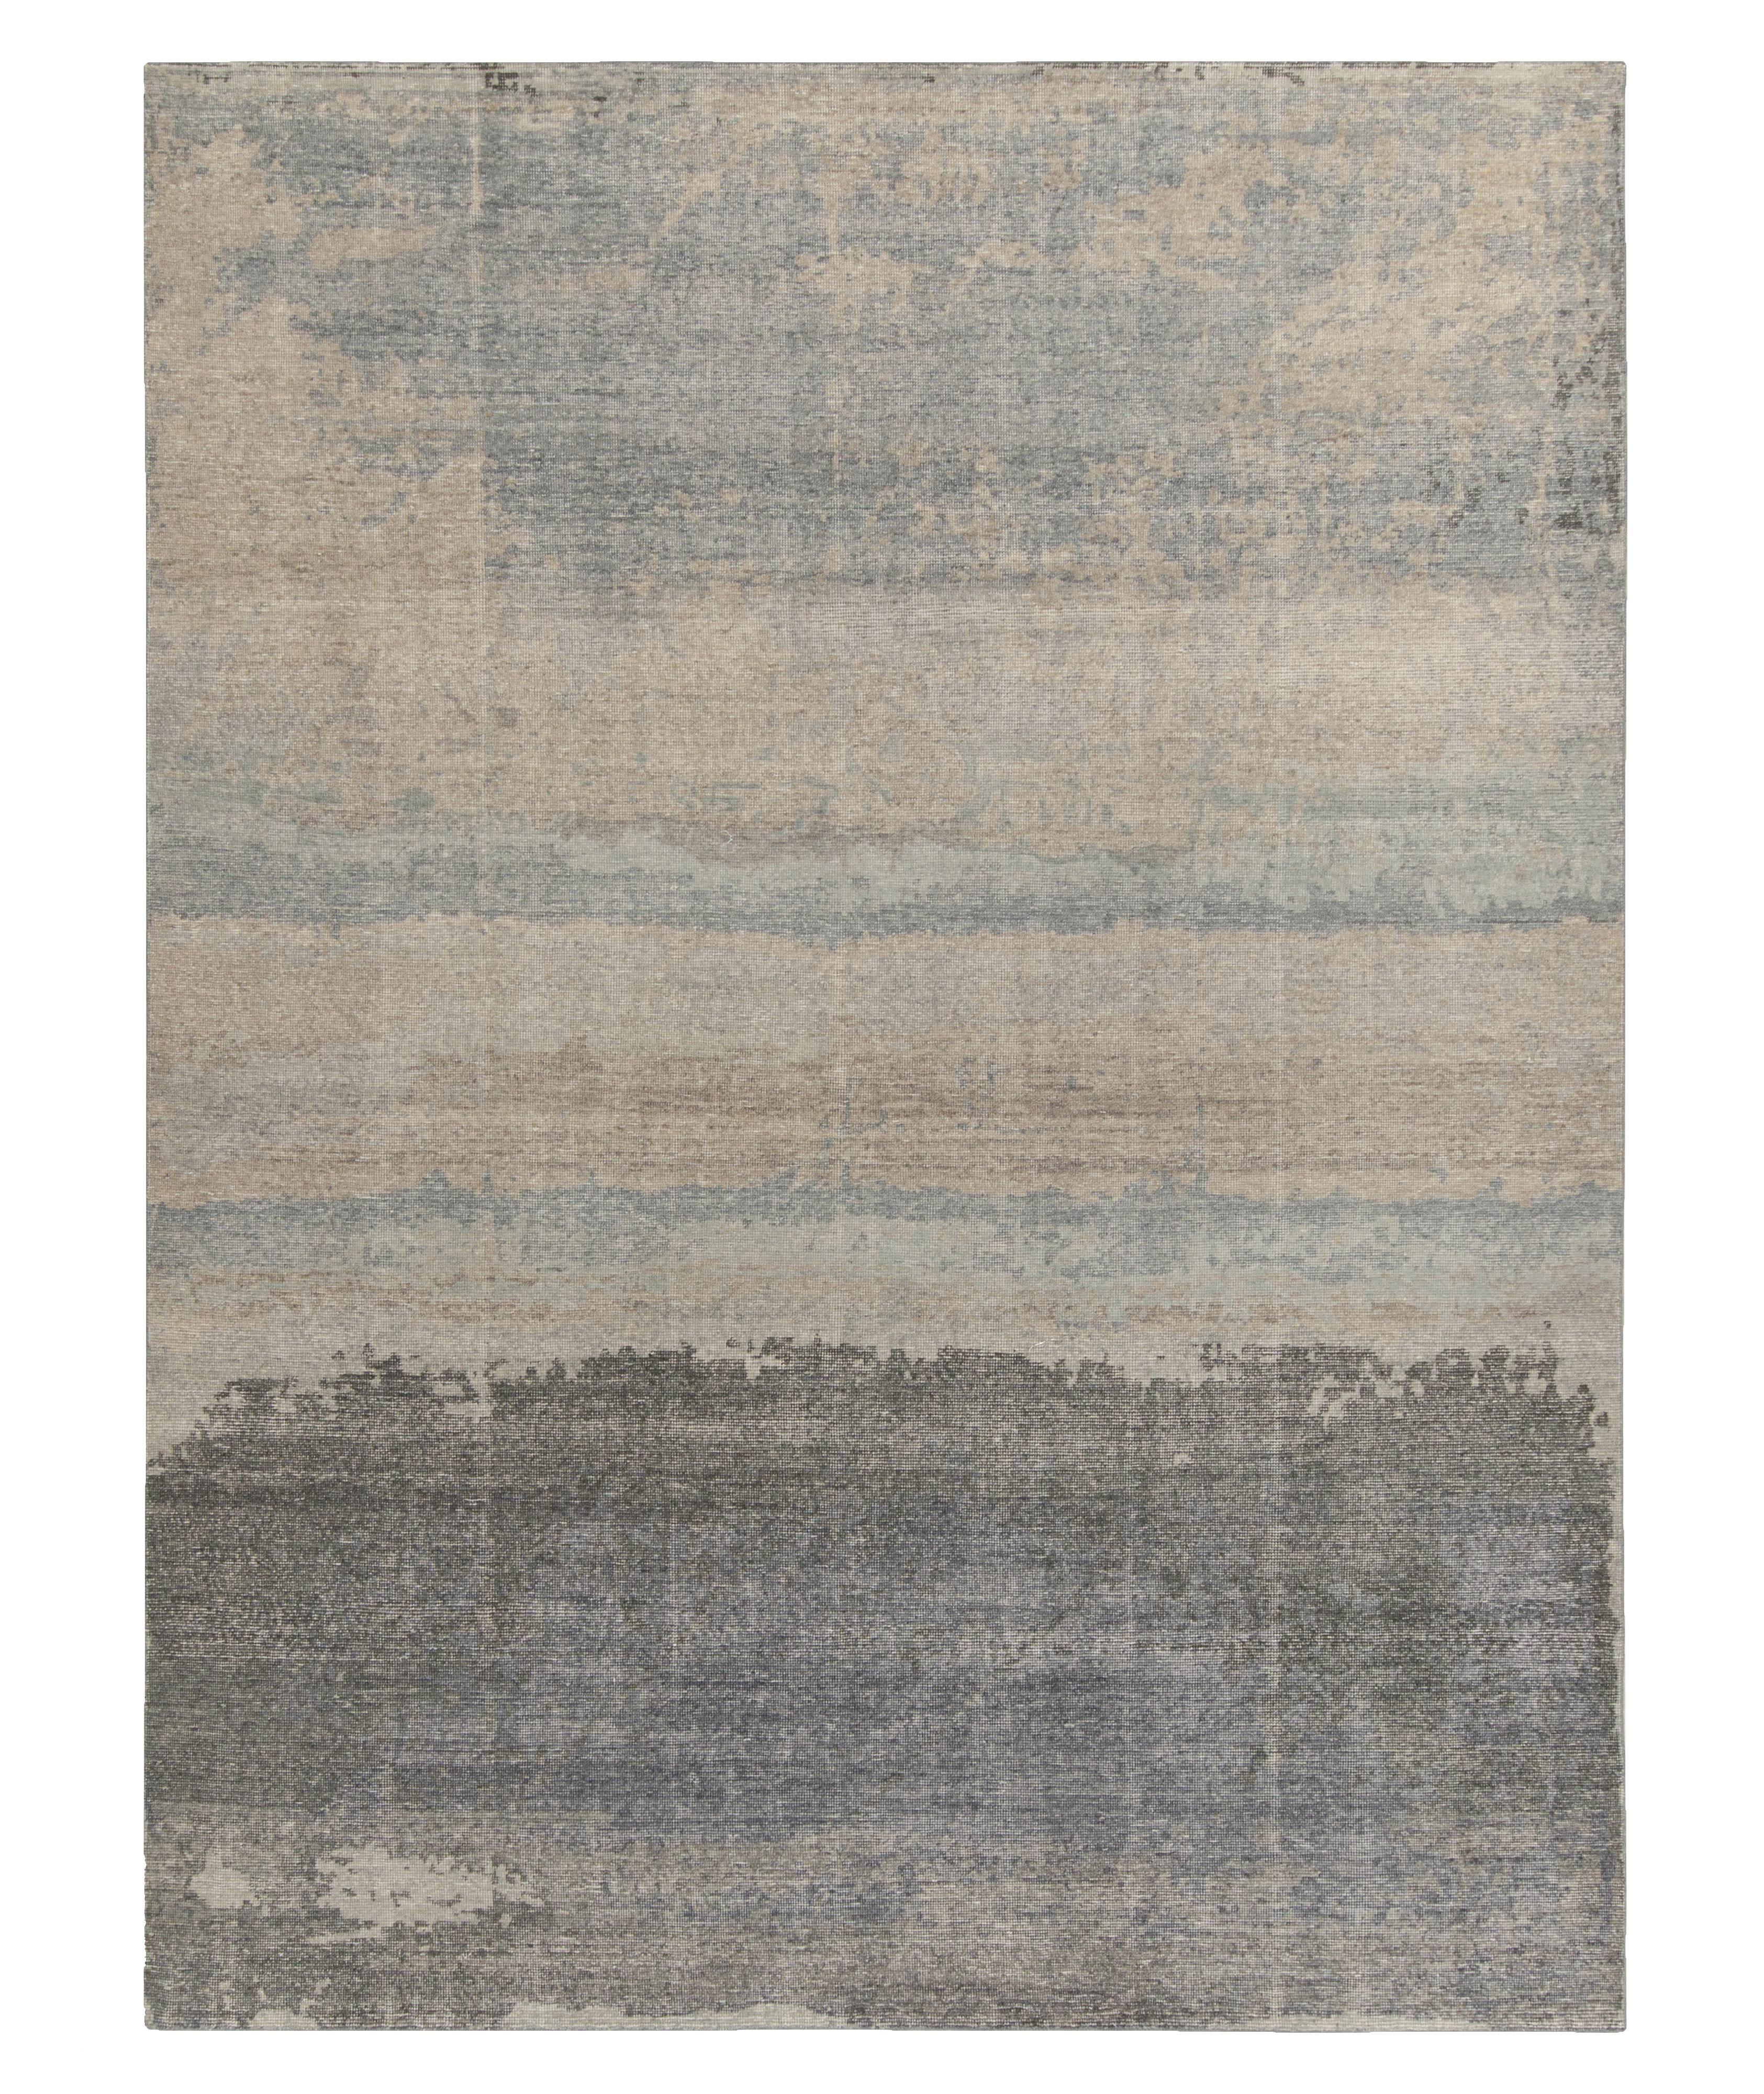 Distressed Modern Grey Blue Beige Abstract Rug image 0